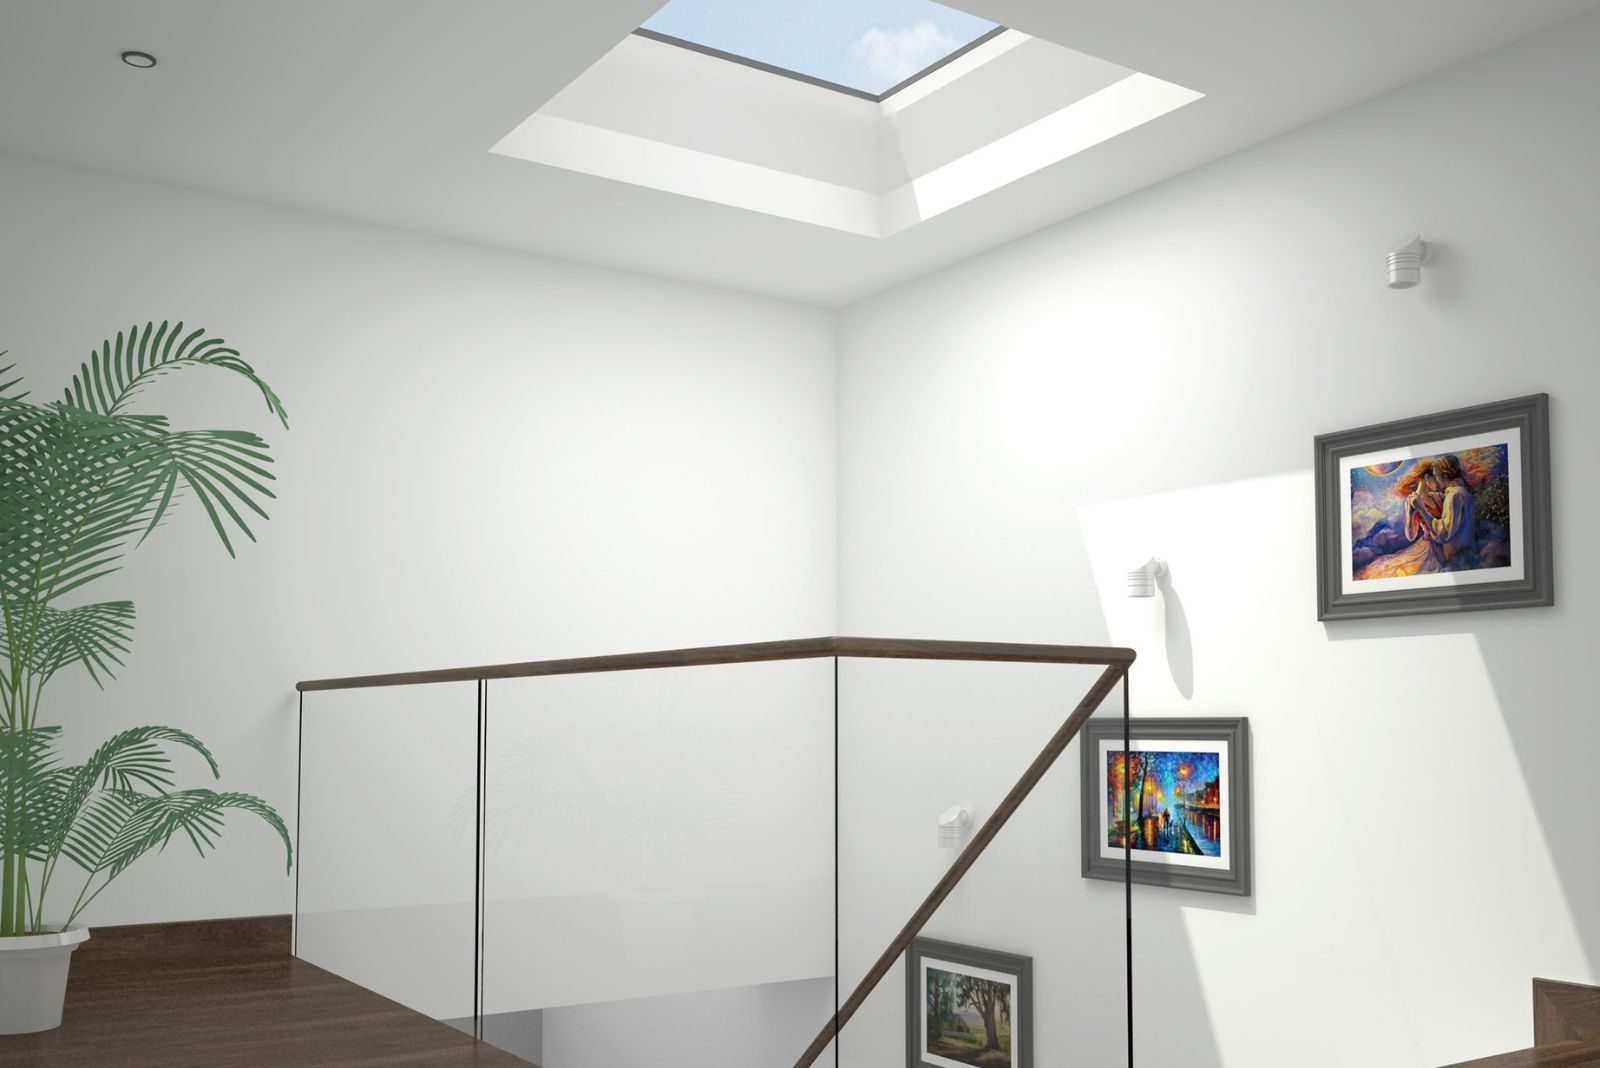 Electric Opening Skylight 1200 x 1200mm